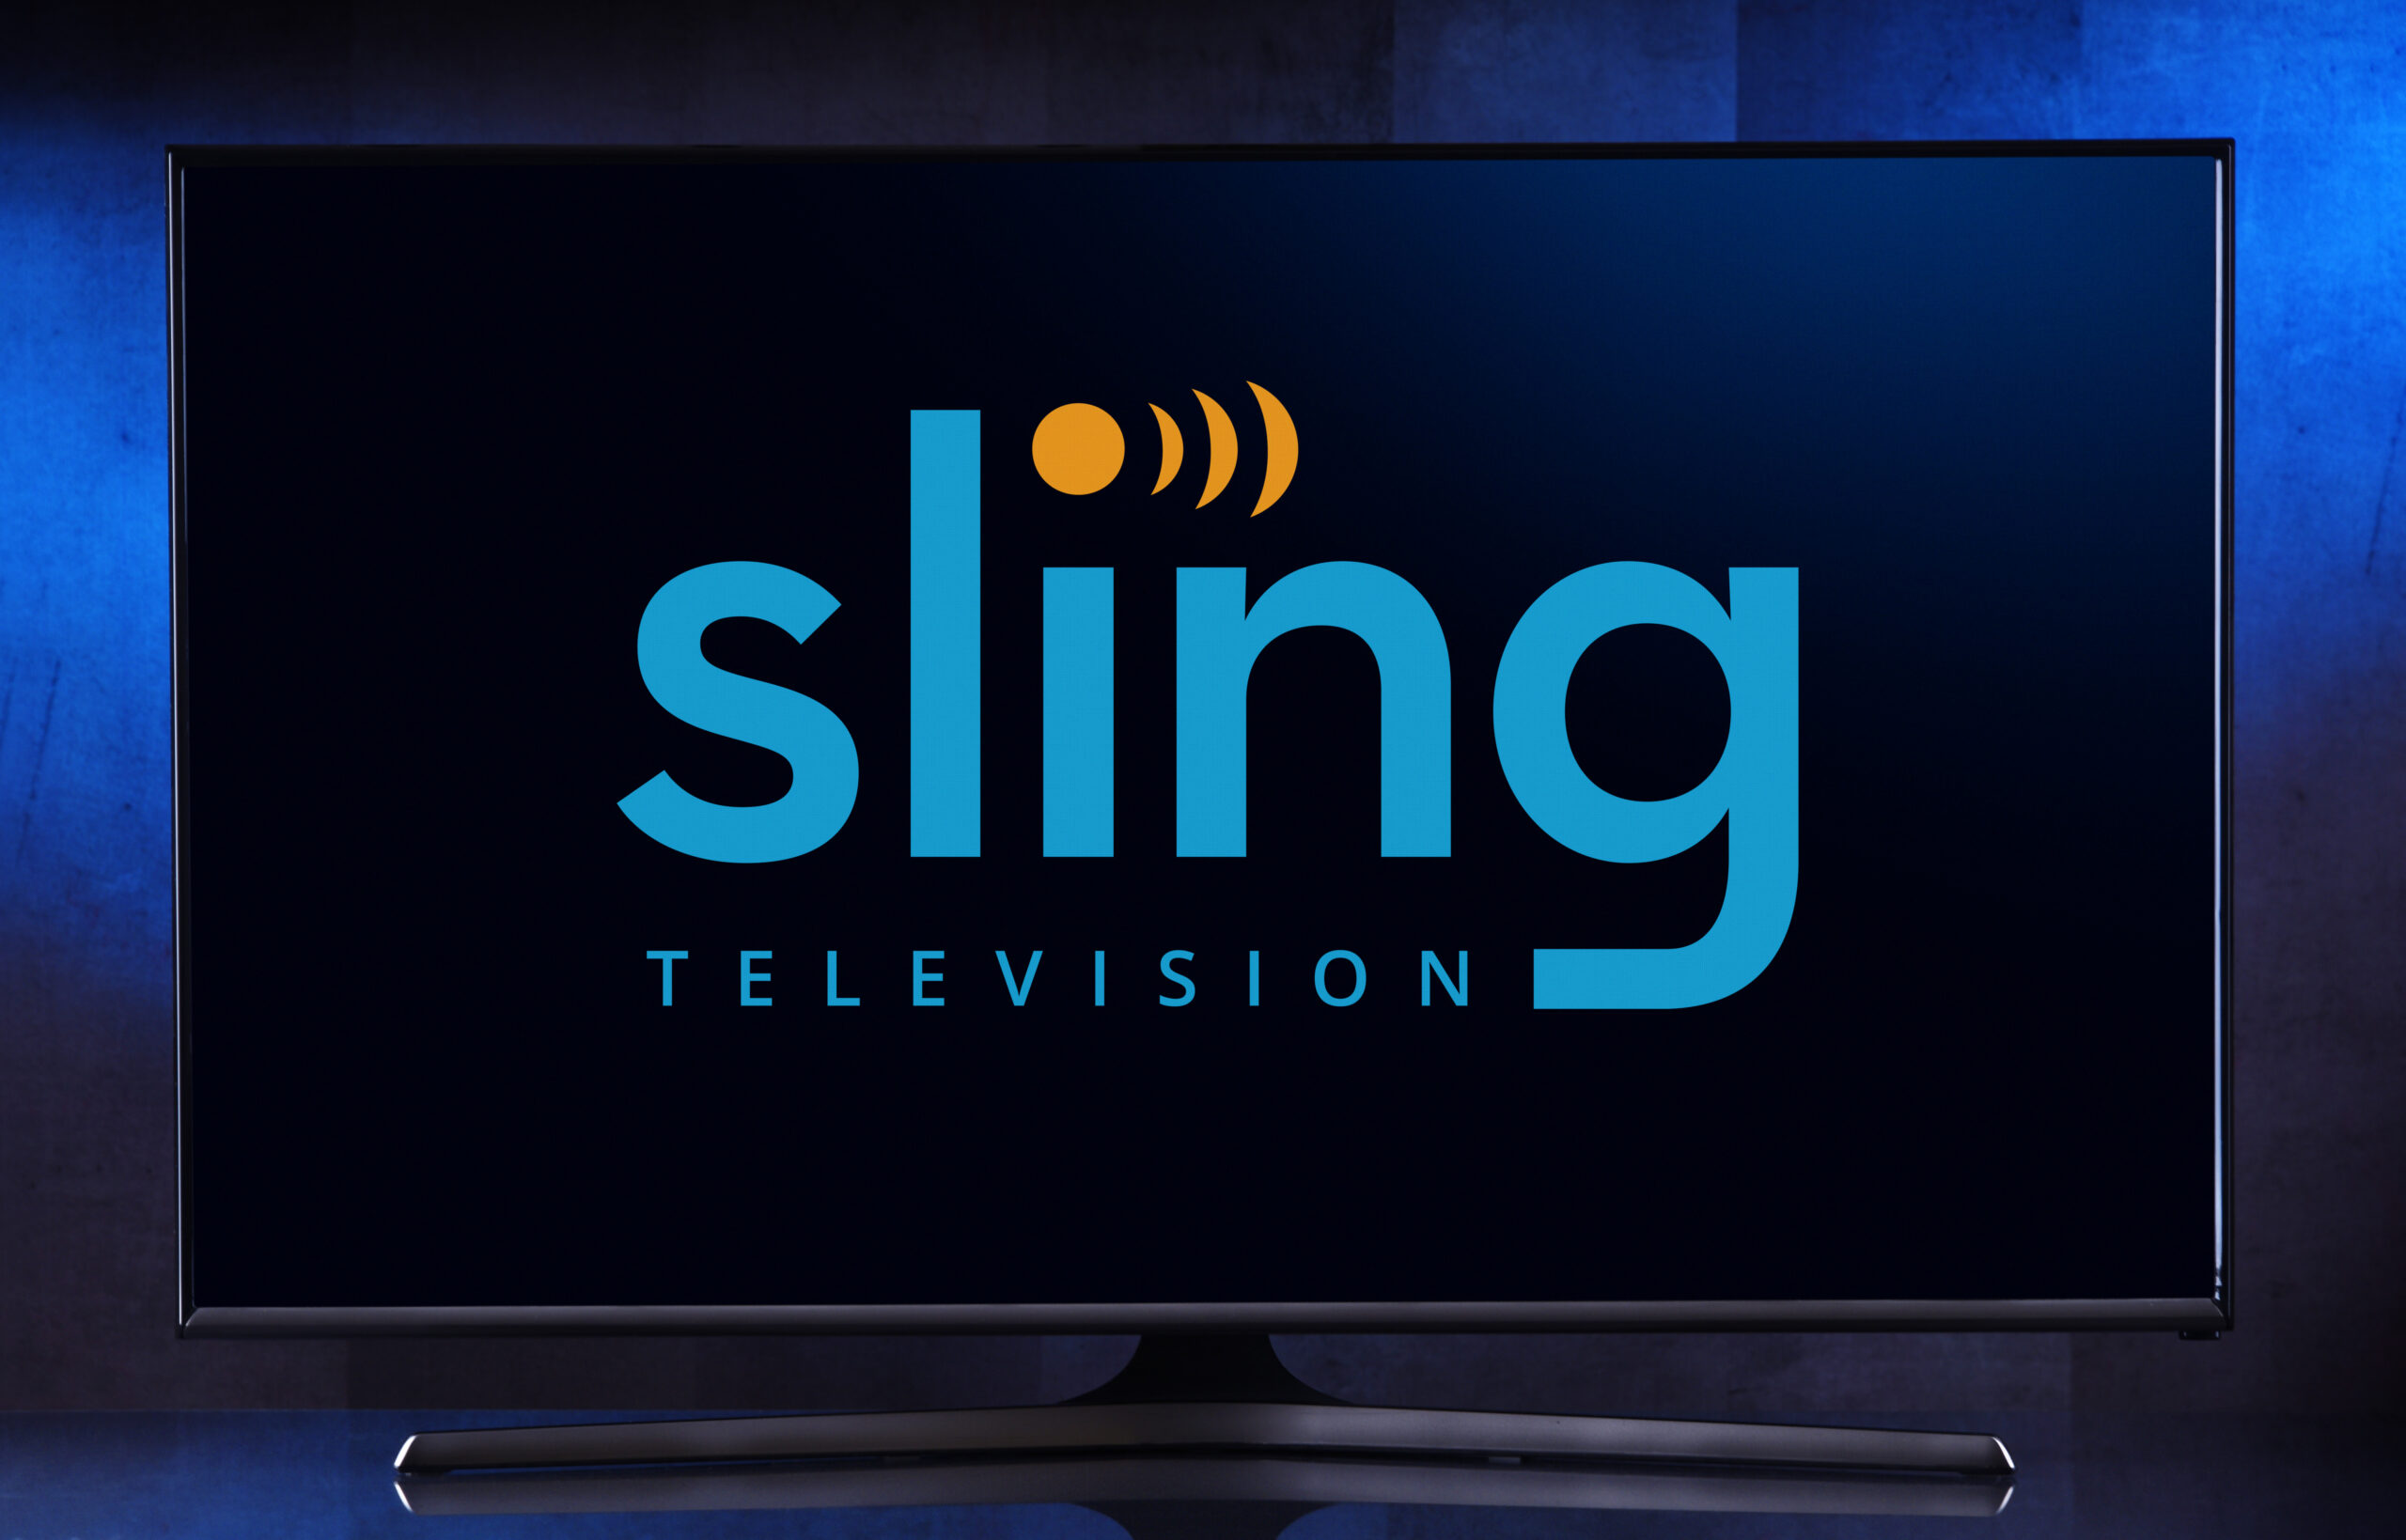 DISH Is Merging with EchoStar, But What Does That Mean for Sling TV? – Ask Luke